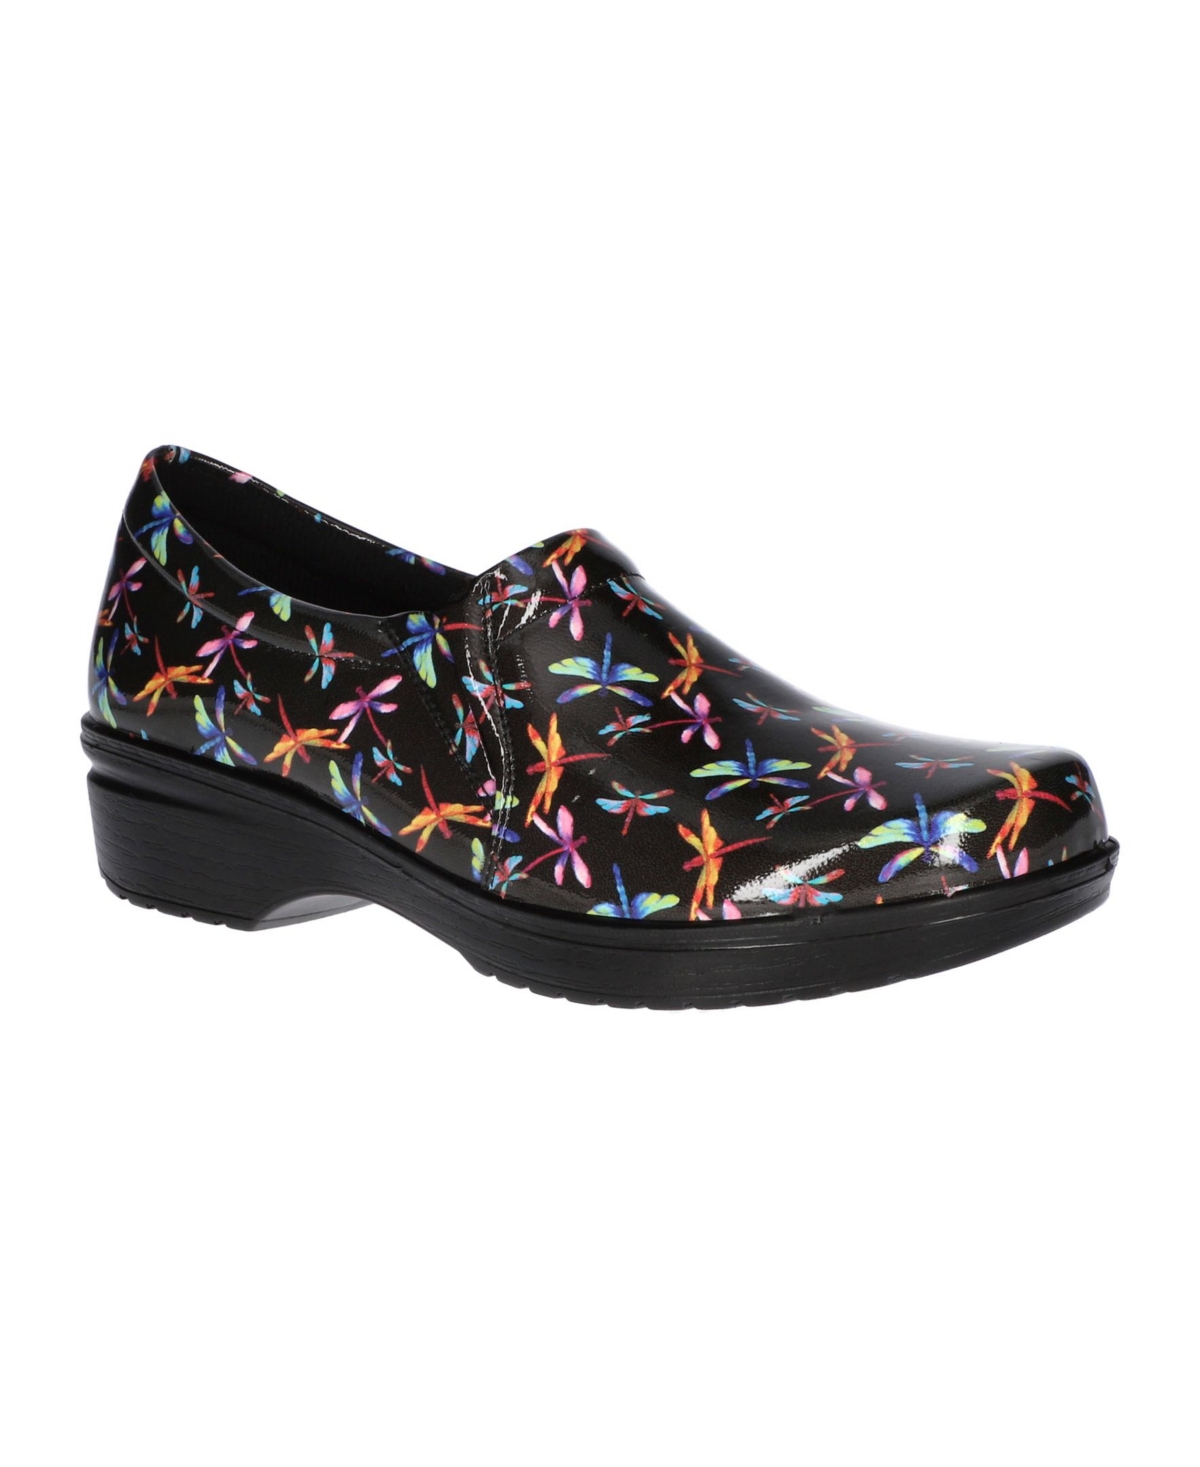 Women's Tiffany Slip Resistant Clogs - Dragonfly Patent